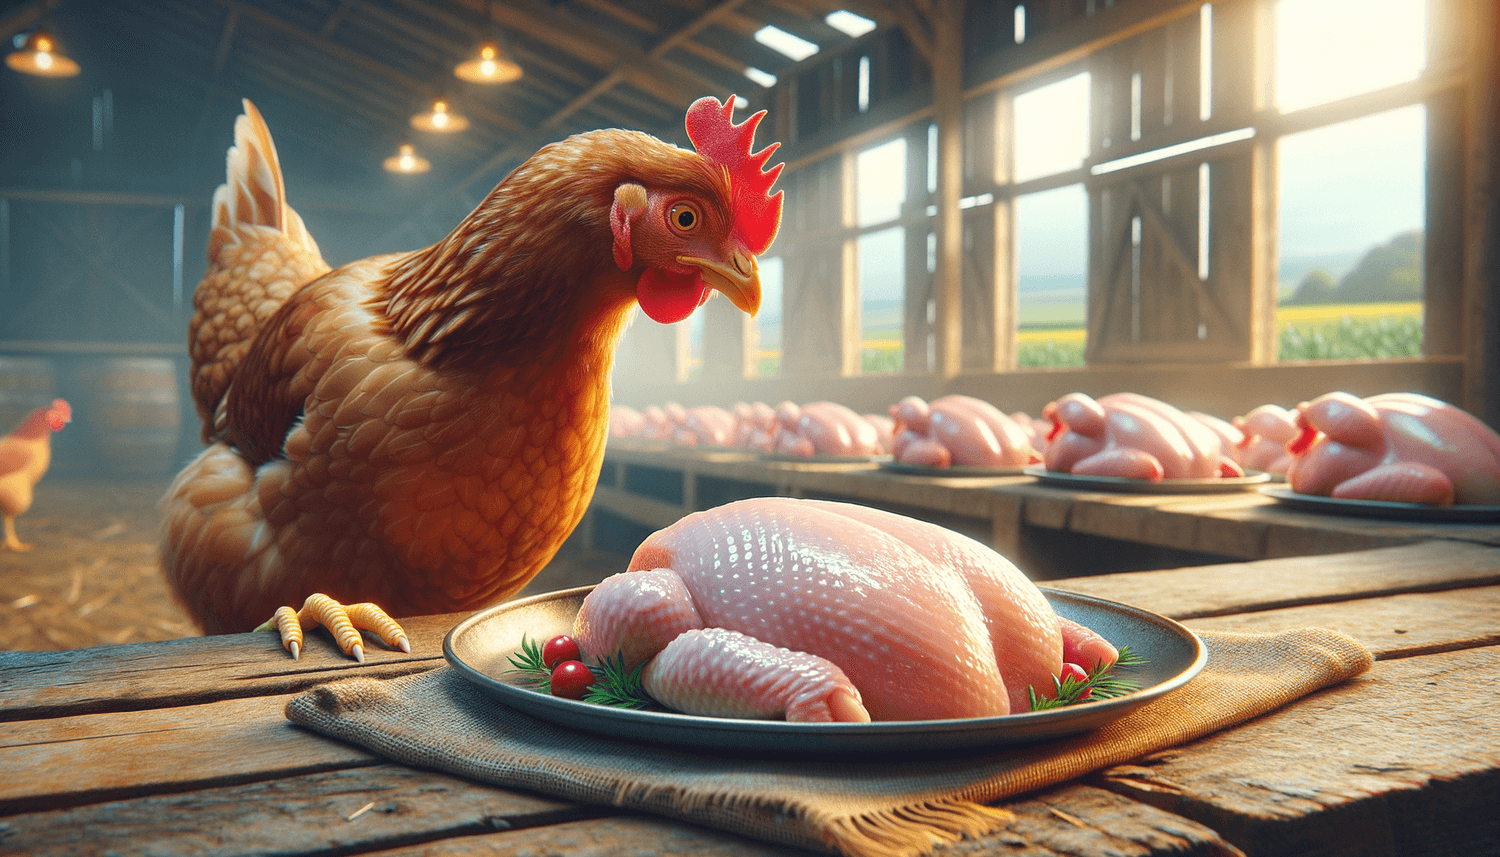 Can Chickens Eat Raw Chicken?